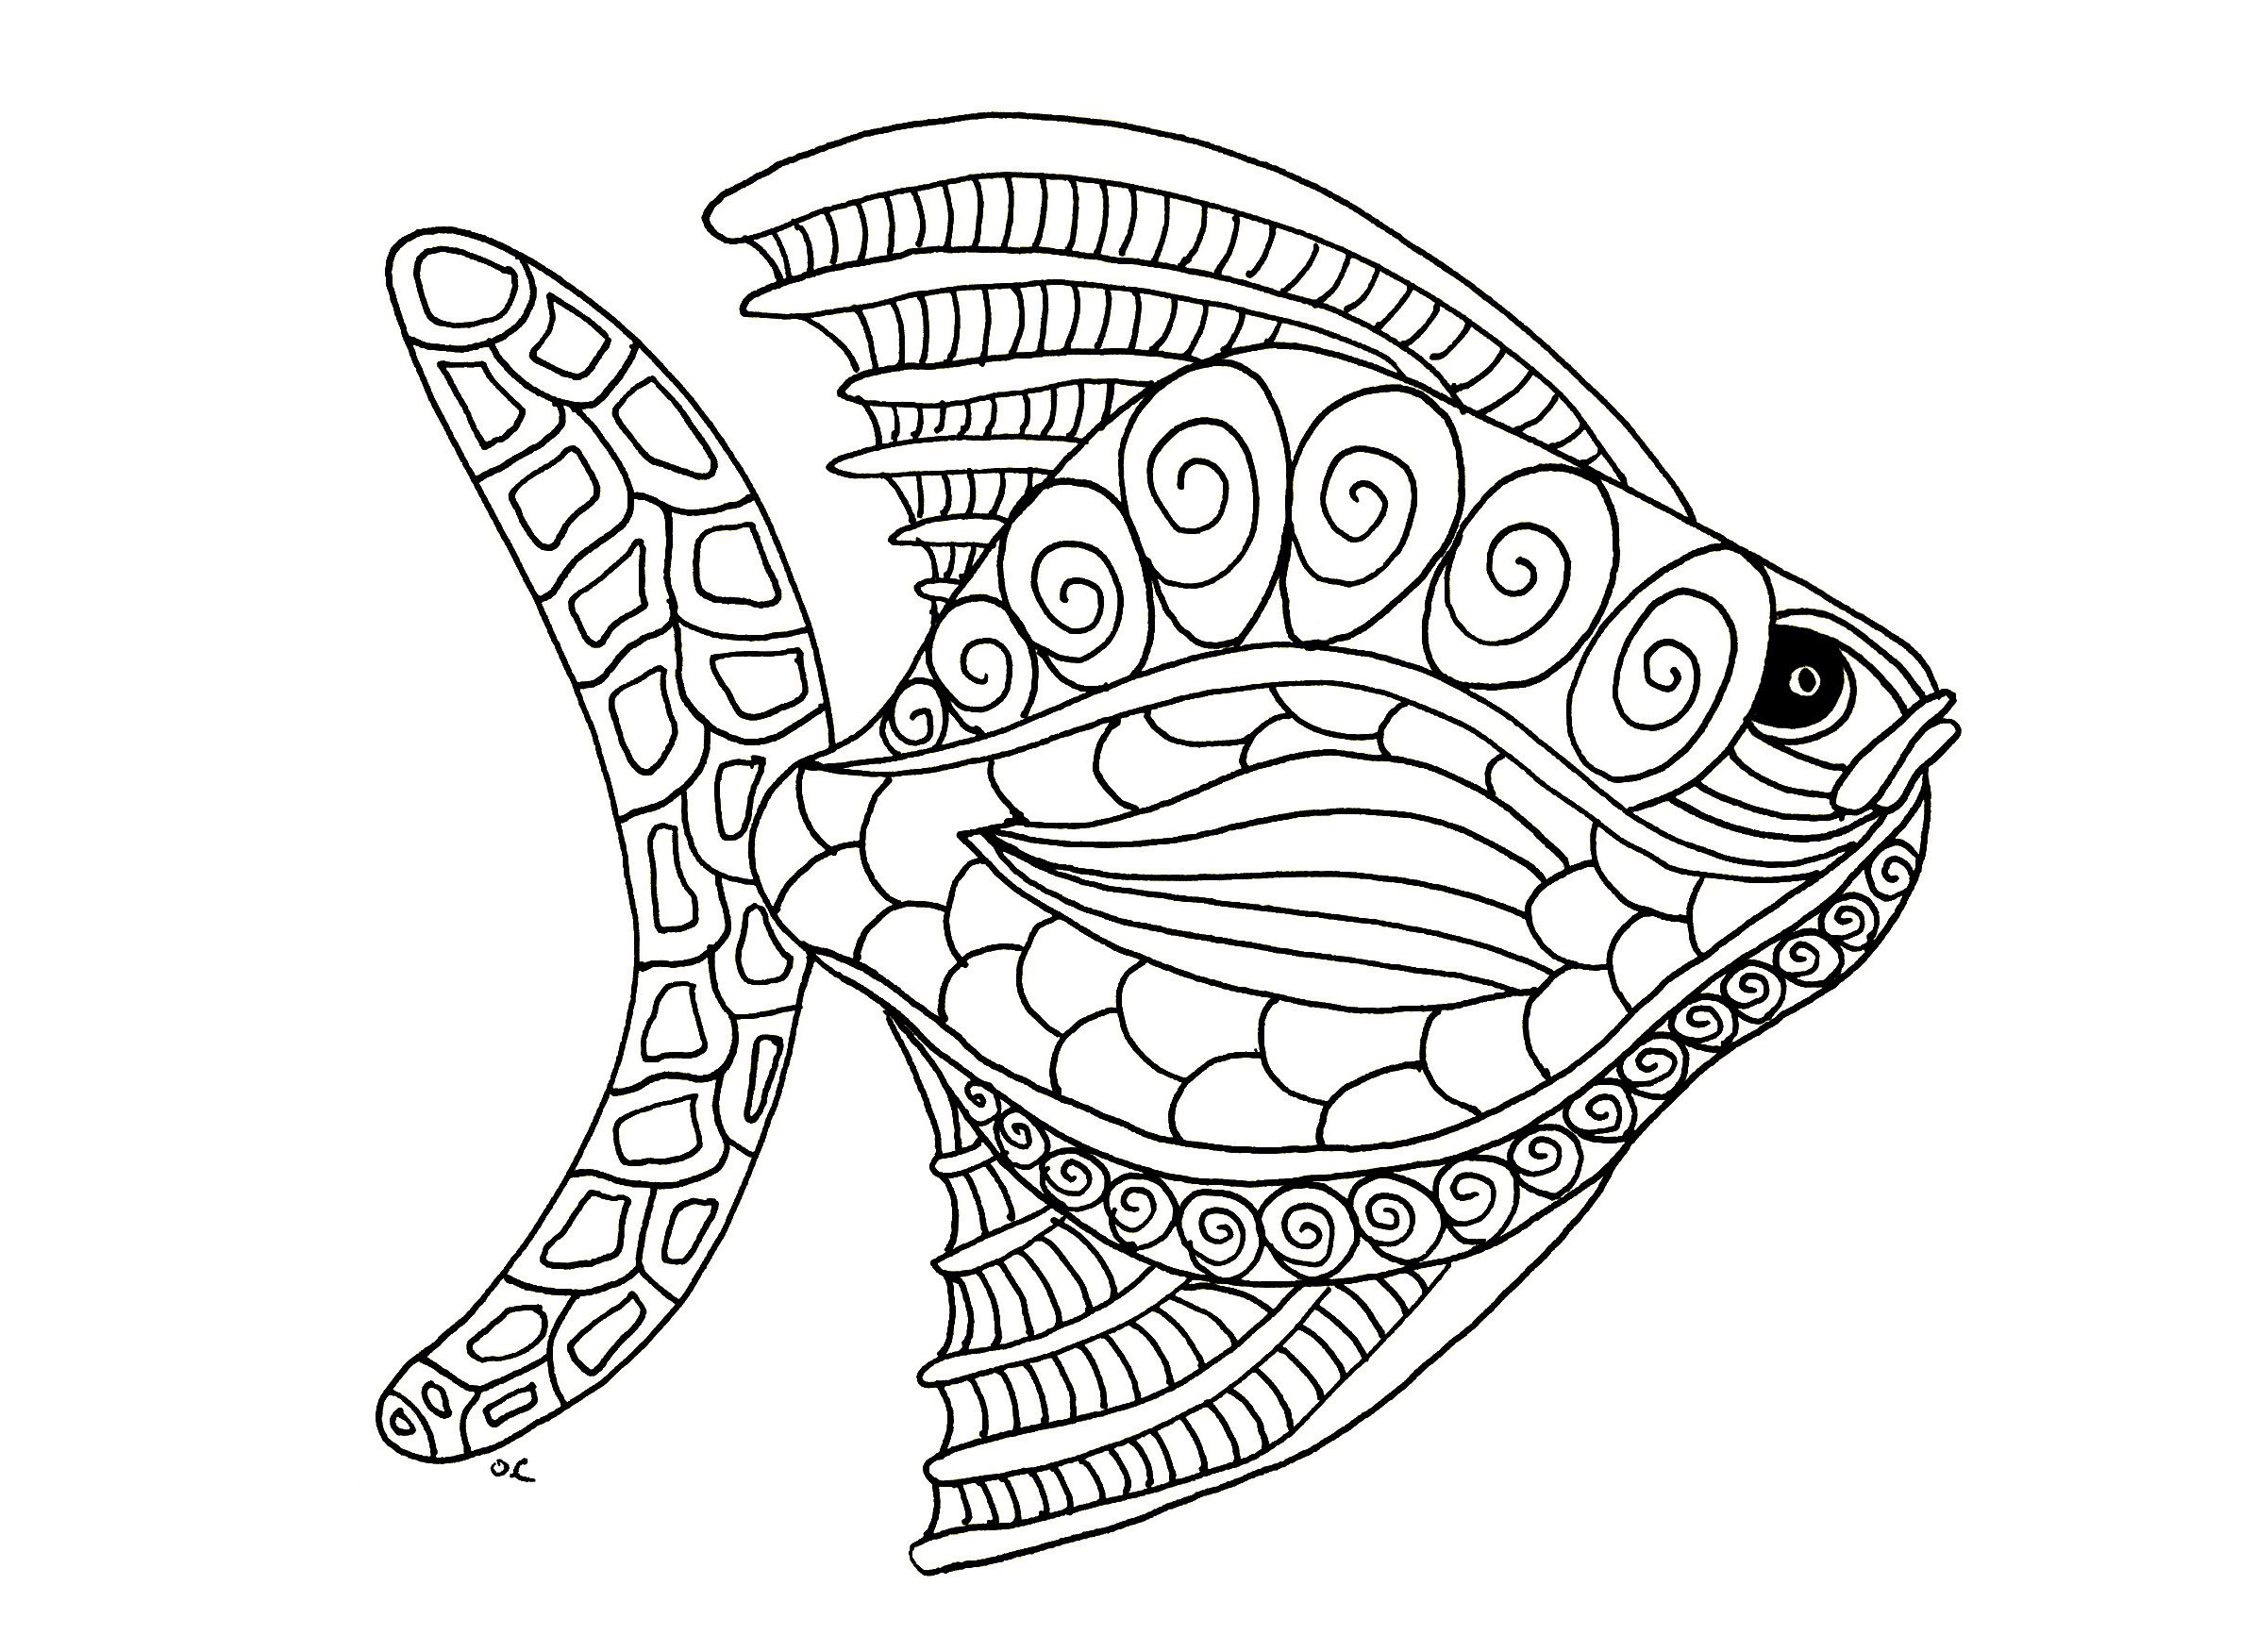 Coloring Sheets For Adults Printable
 Animal Coloring Pages for Adults Best Coloring Pages For